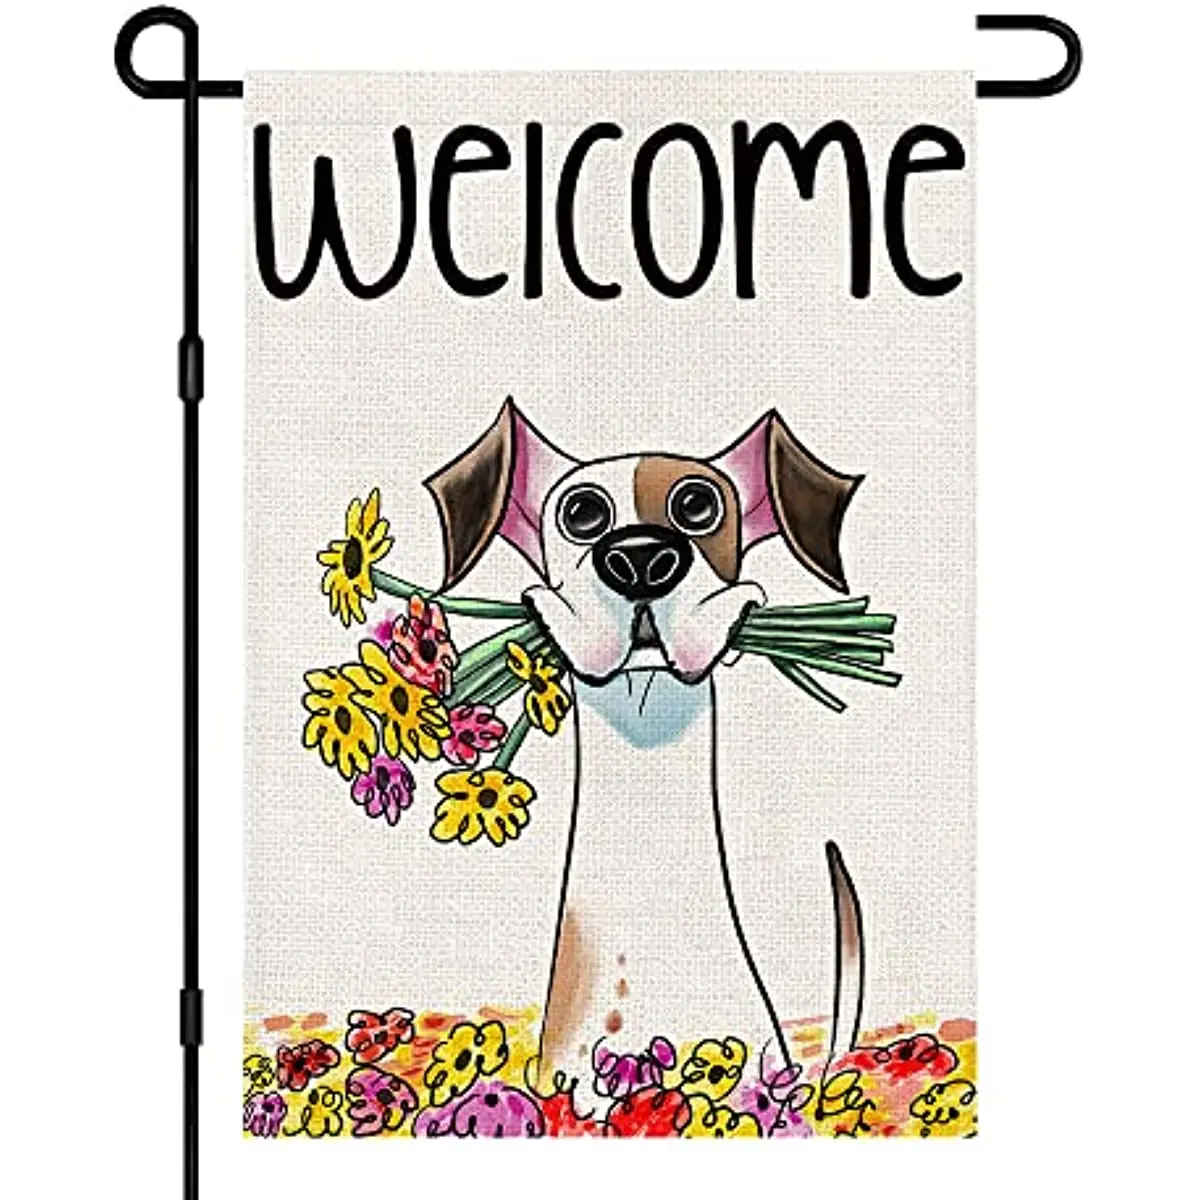 

New Welcome Spring Flower Garden Flag 12x18 Inch Double Sided Burlap Outside, Seasonal Floral Dog Sign Yard Farmhouse Outdoor